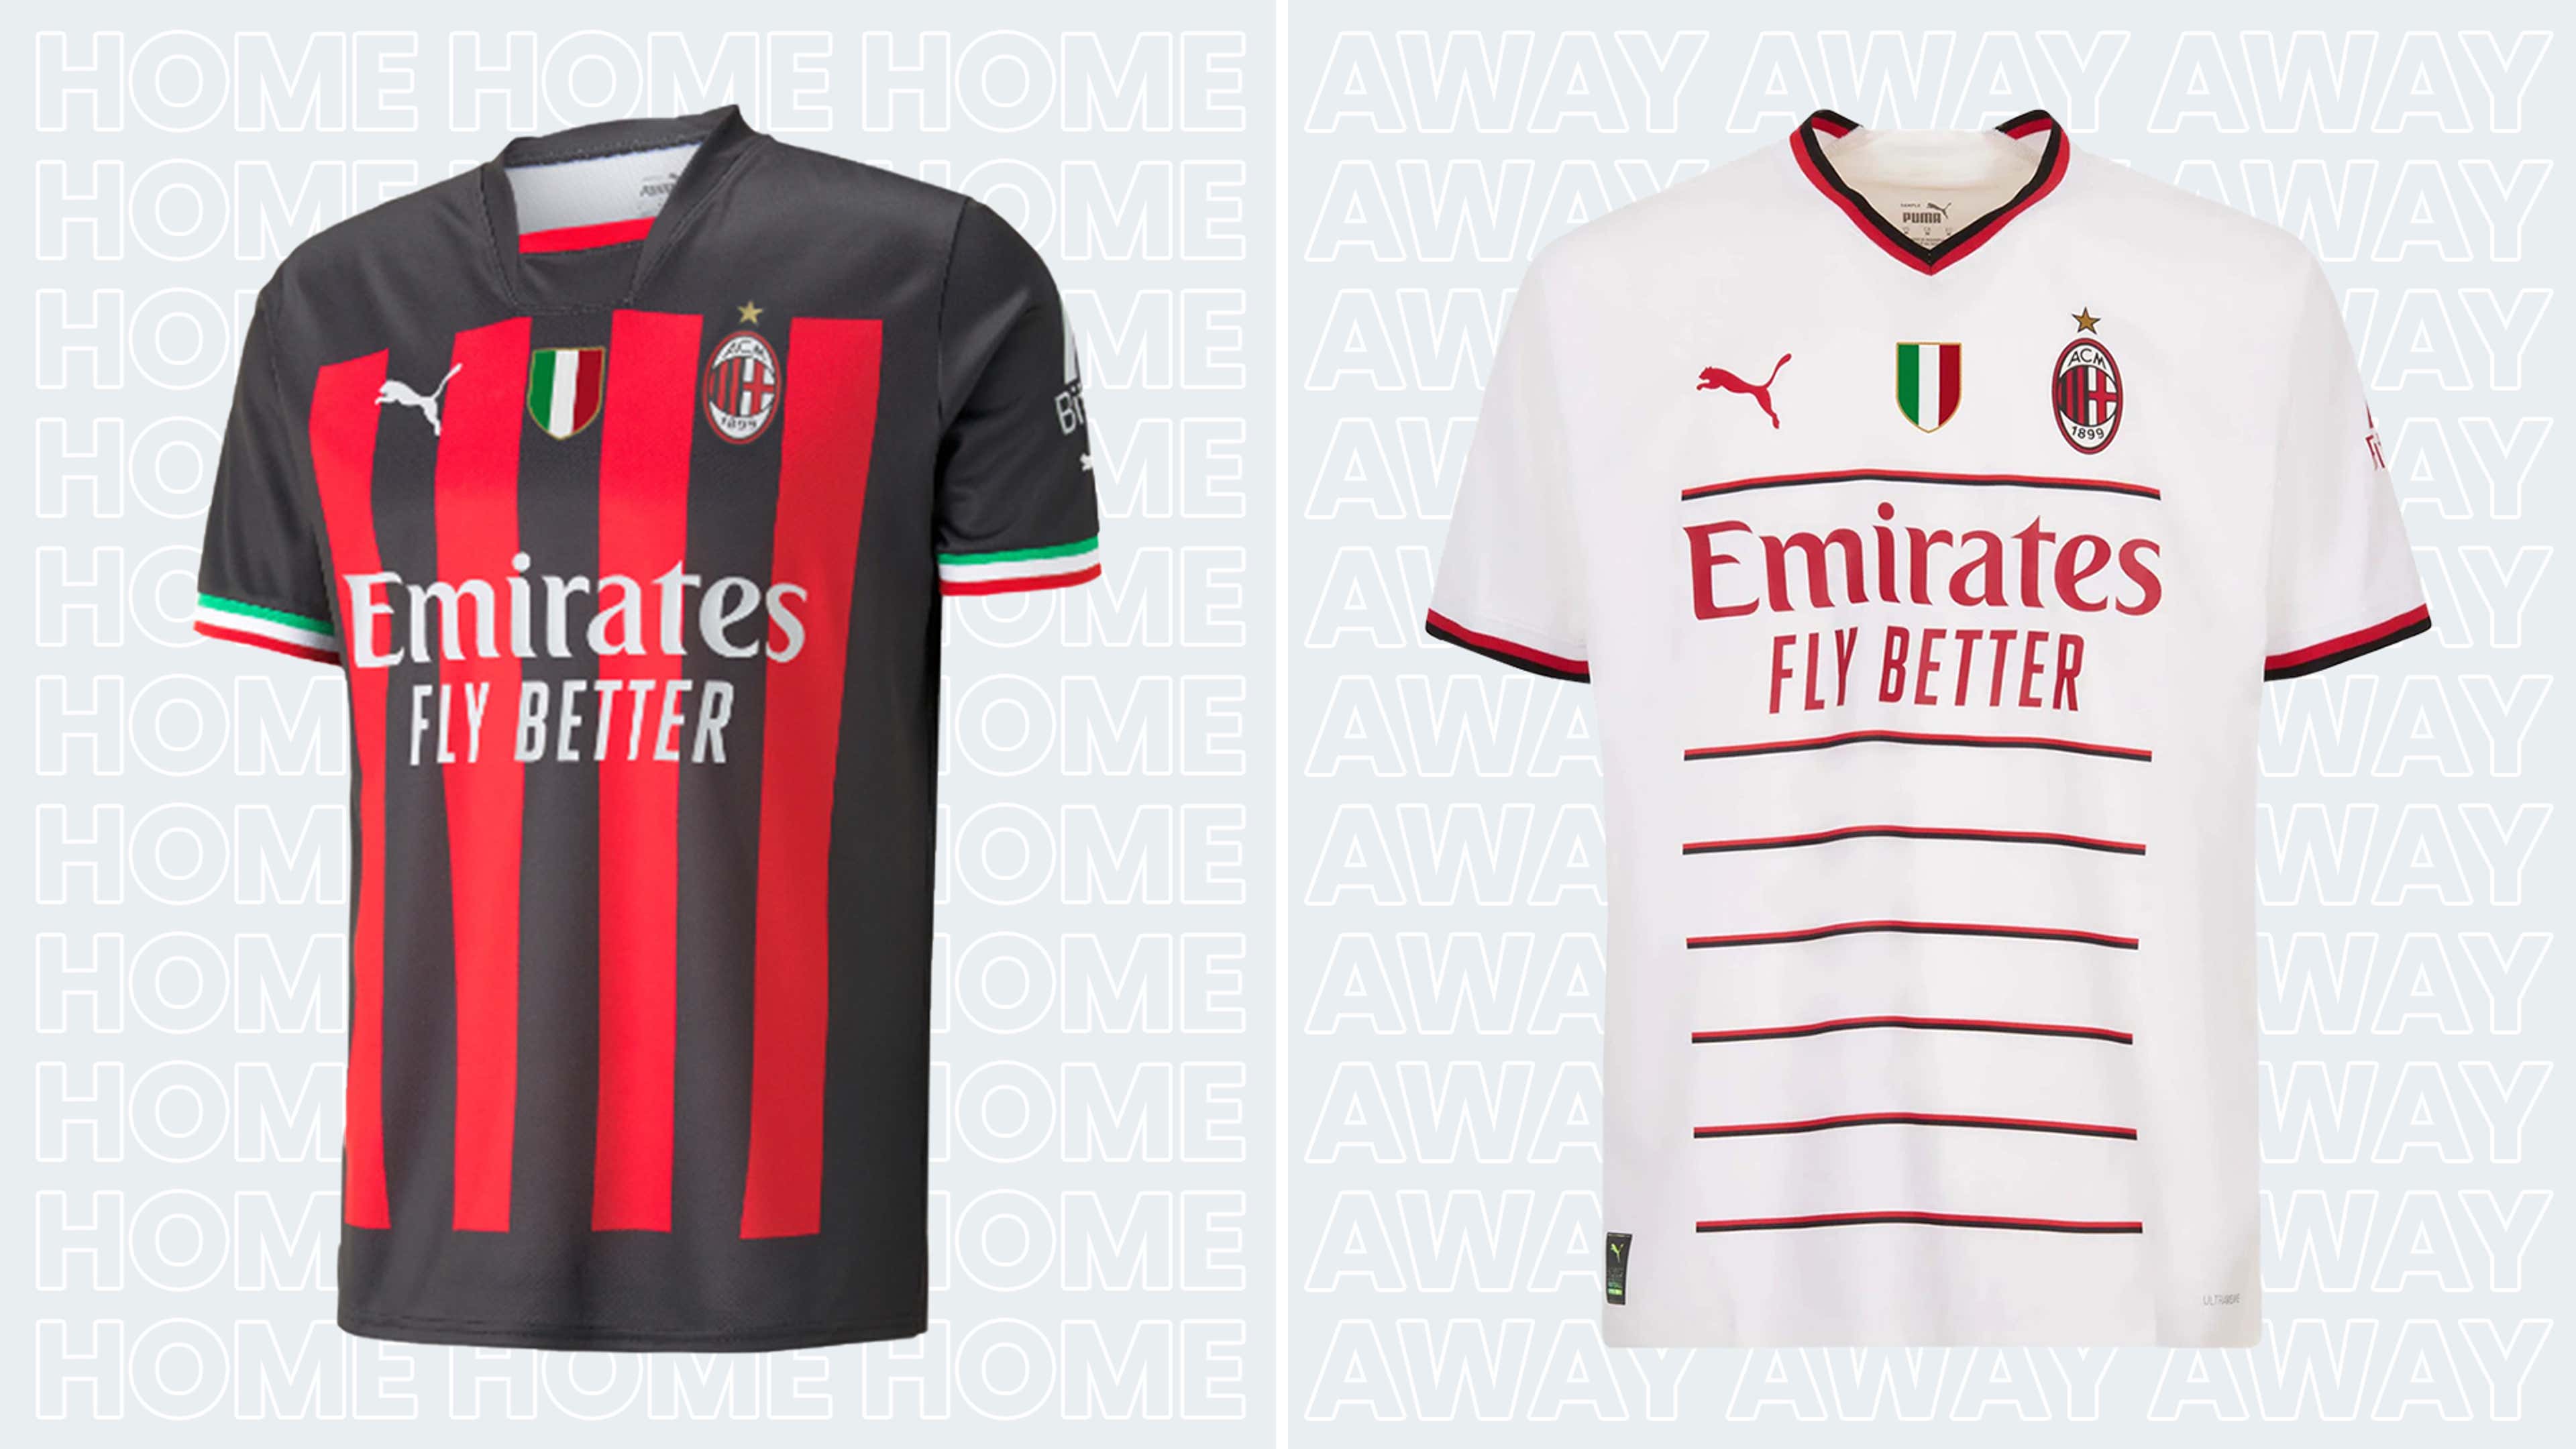 Ranked: The 2019/20 Premier League home kits from worst to best